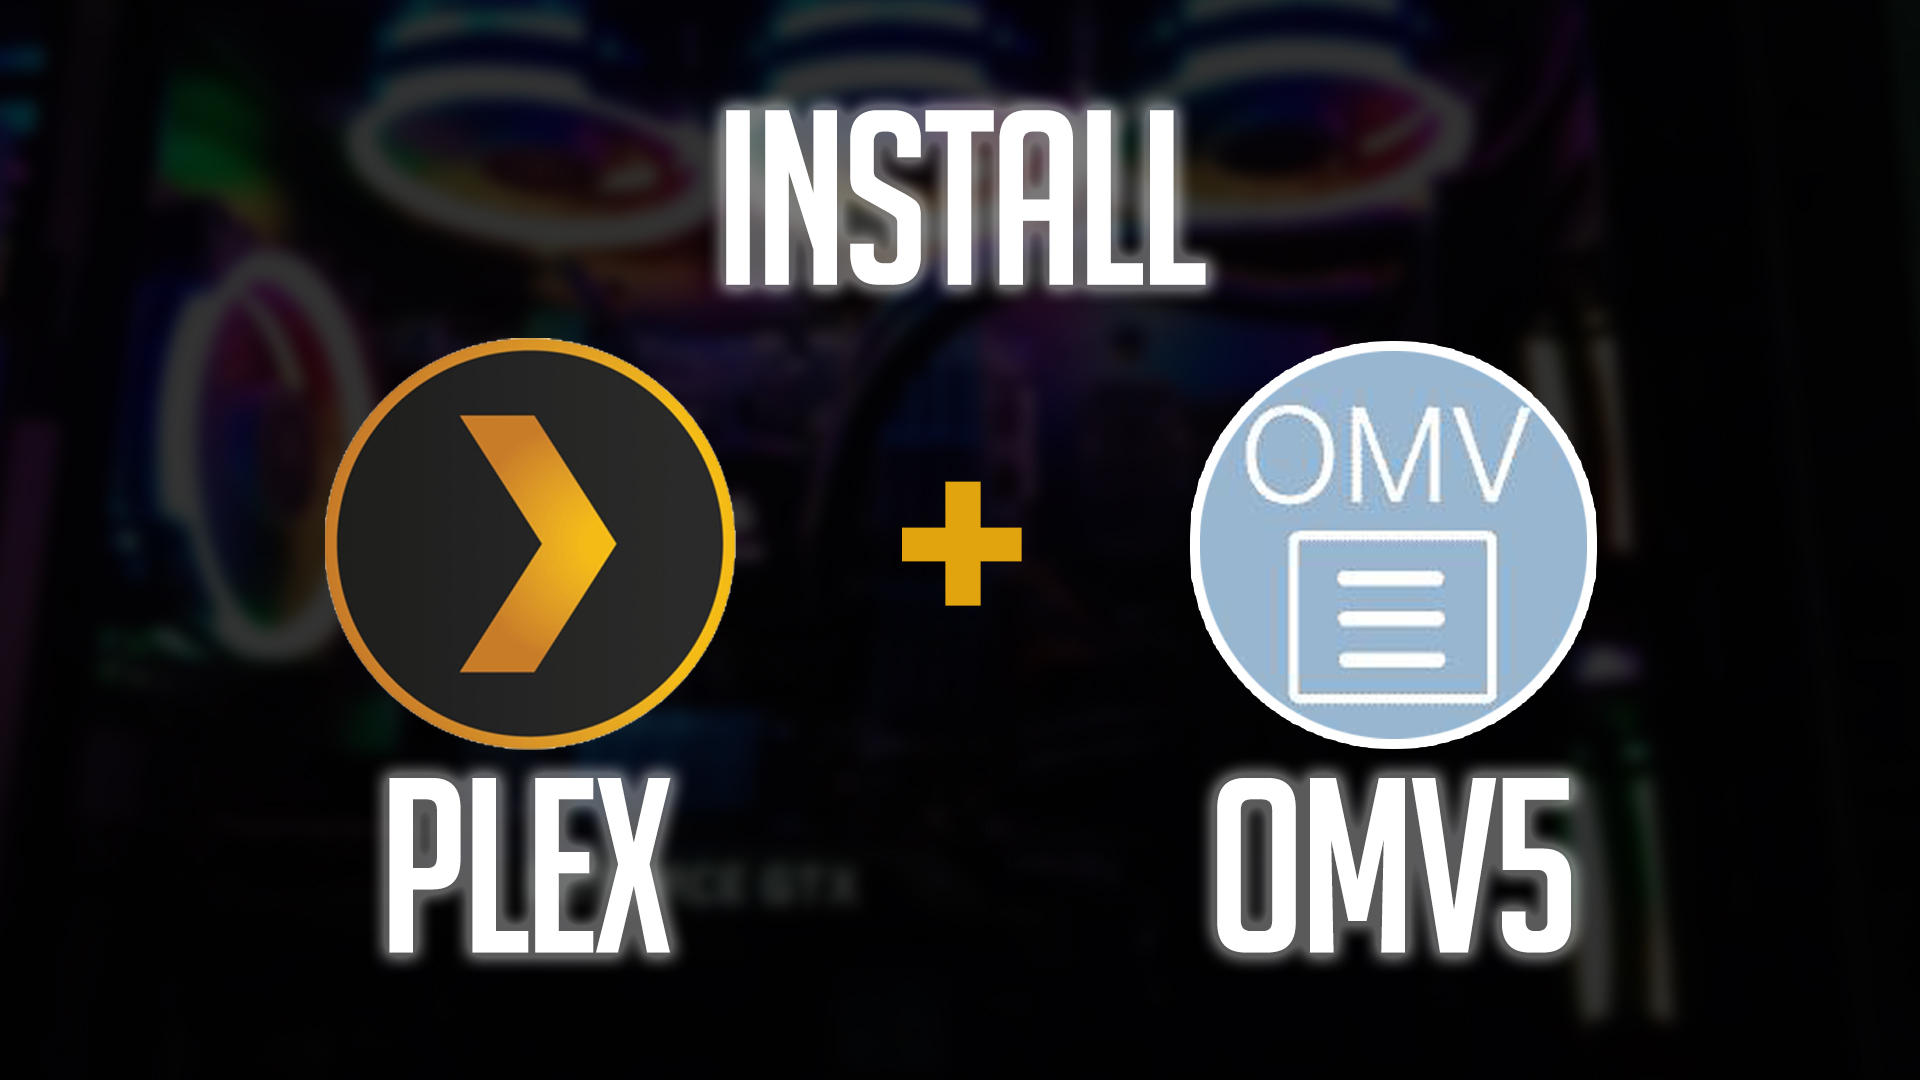 Cooperation Tear calendar How To Install Plex on OpenMediaVault 5 - DB Tech